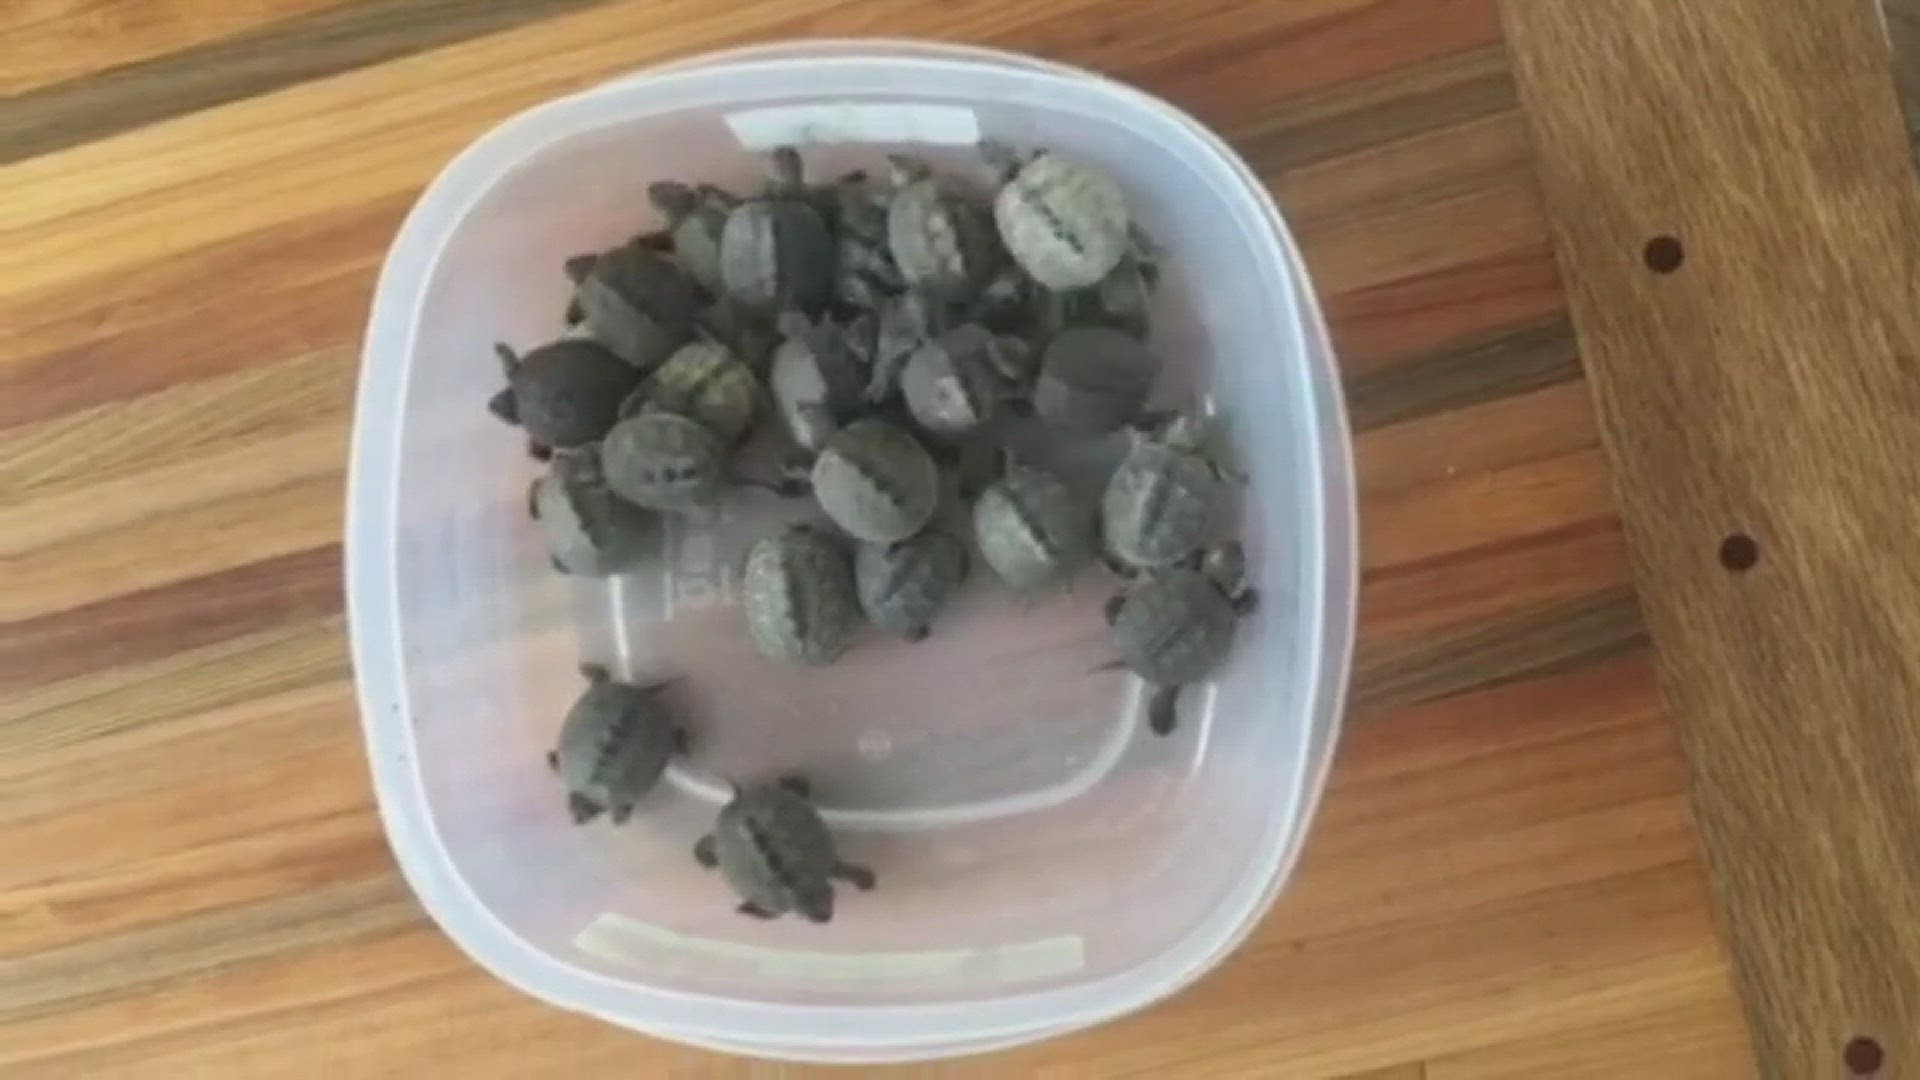 These terrapins were found by students at the Chesapeake Bay Foundation's Brock Environmental Center. (Courtesy: Chesapeake Bay Foundation)